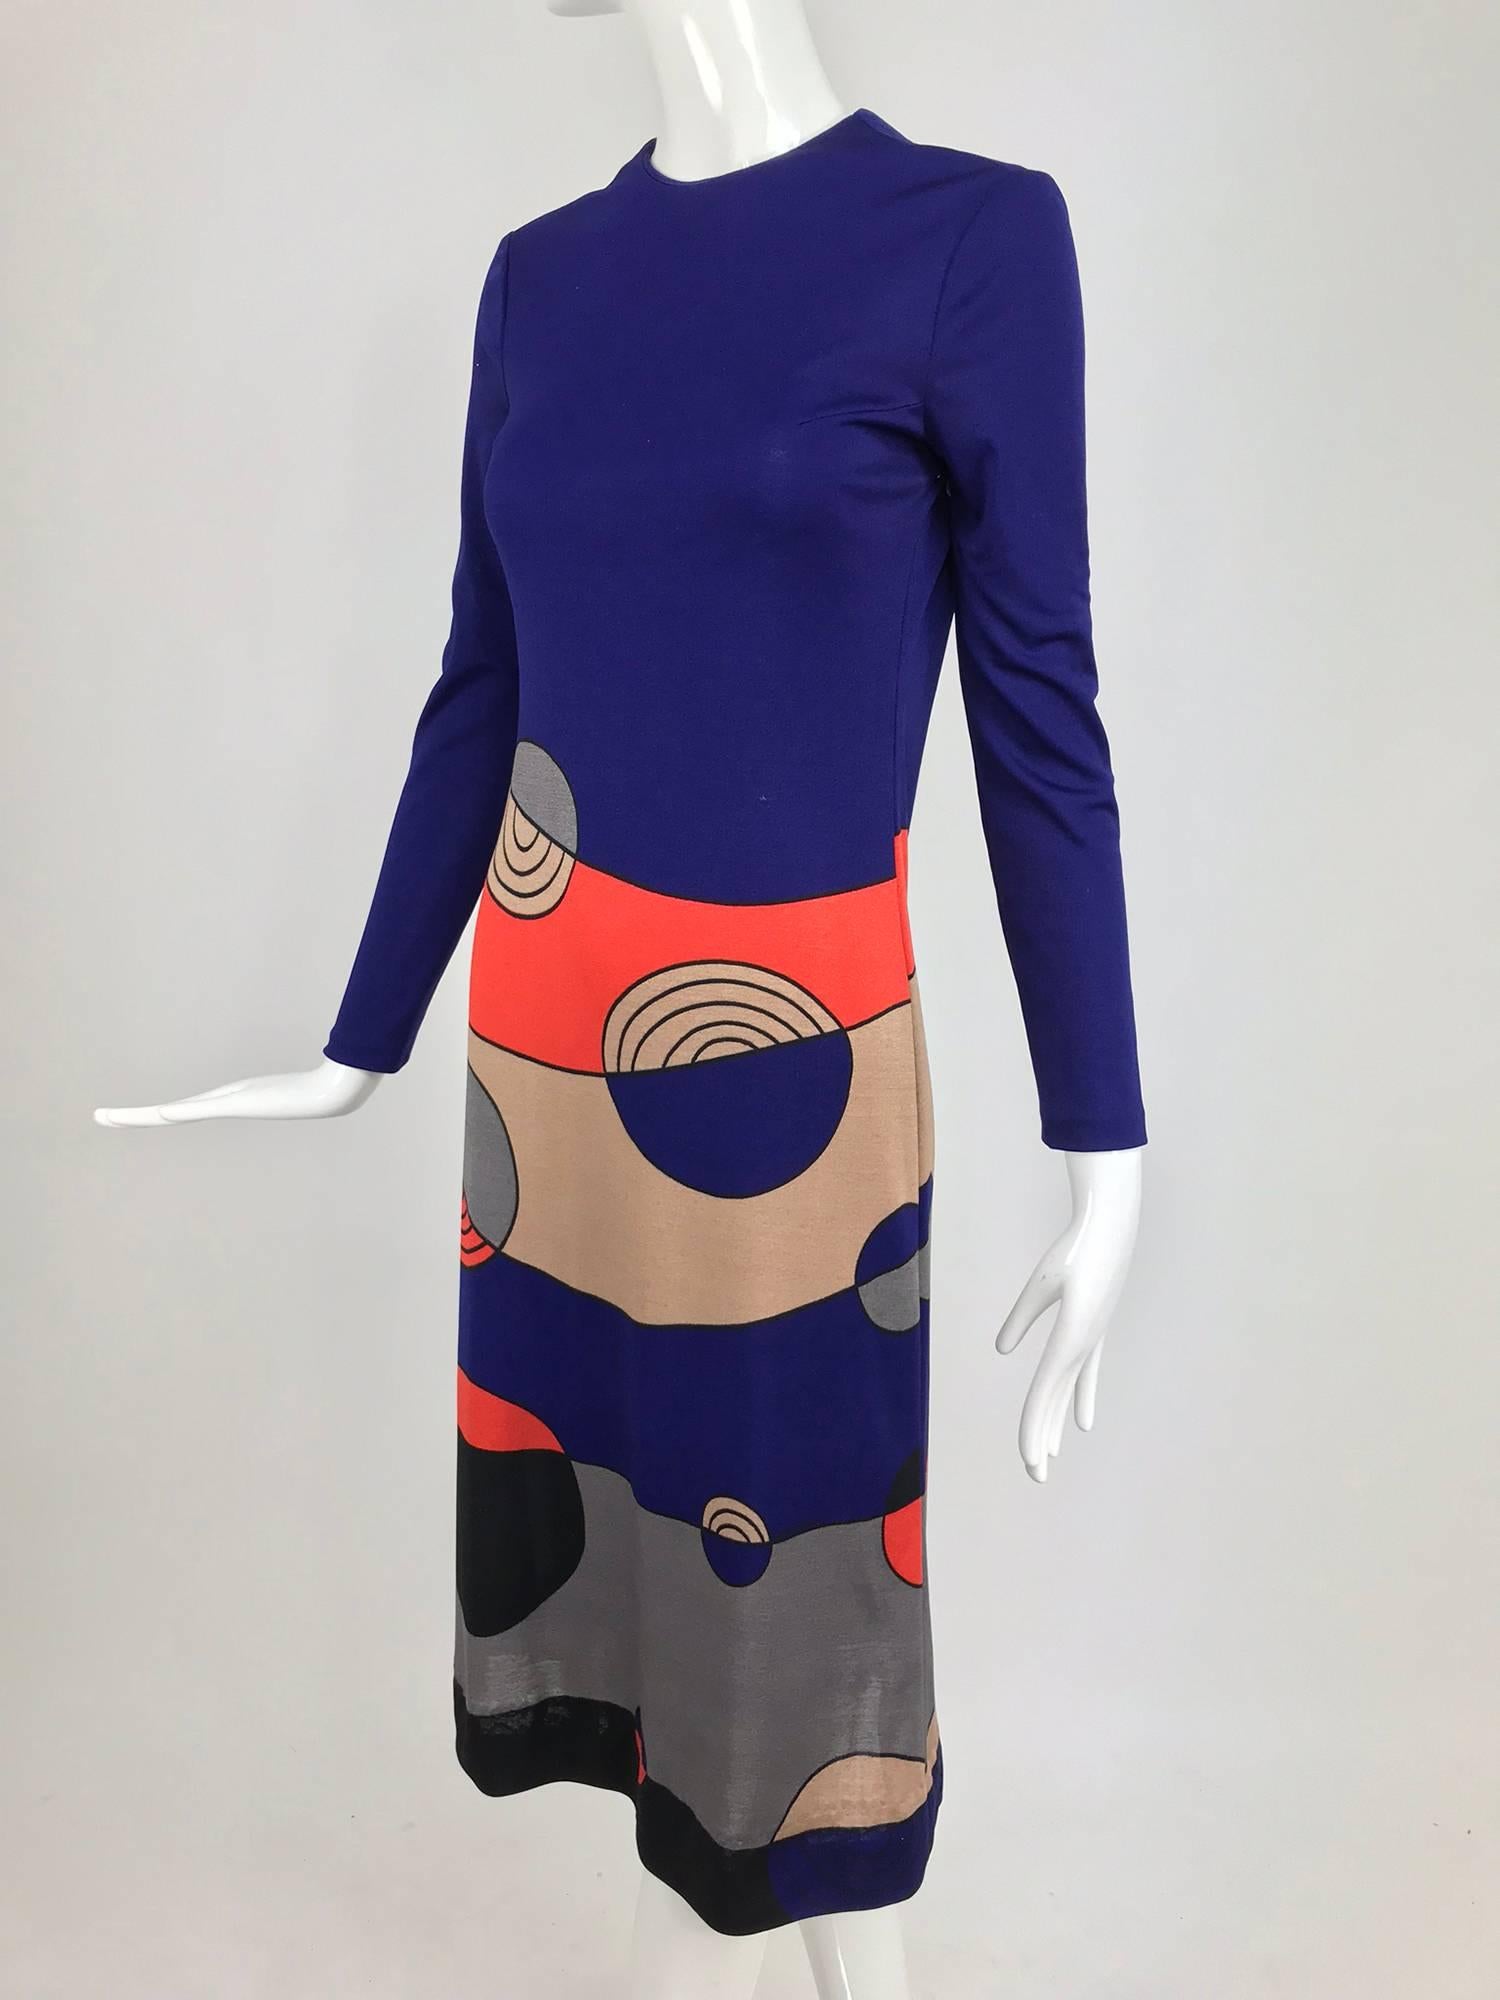 Louis Feraud Op Art Mod print jersey dress from the 1960s...Louis Feraud produced some eye popping jersey dresses in the 60s all bold and in tune with the times...From the 1960s this jersey dress is sleek and still stylish, the print in navy,